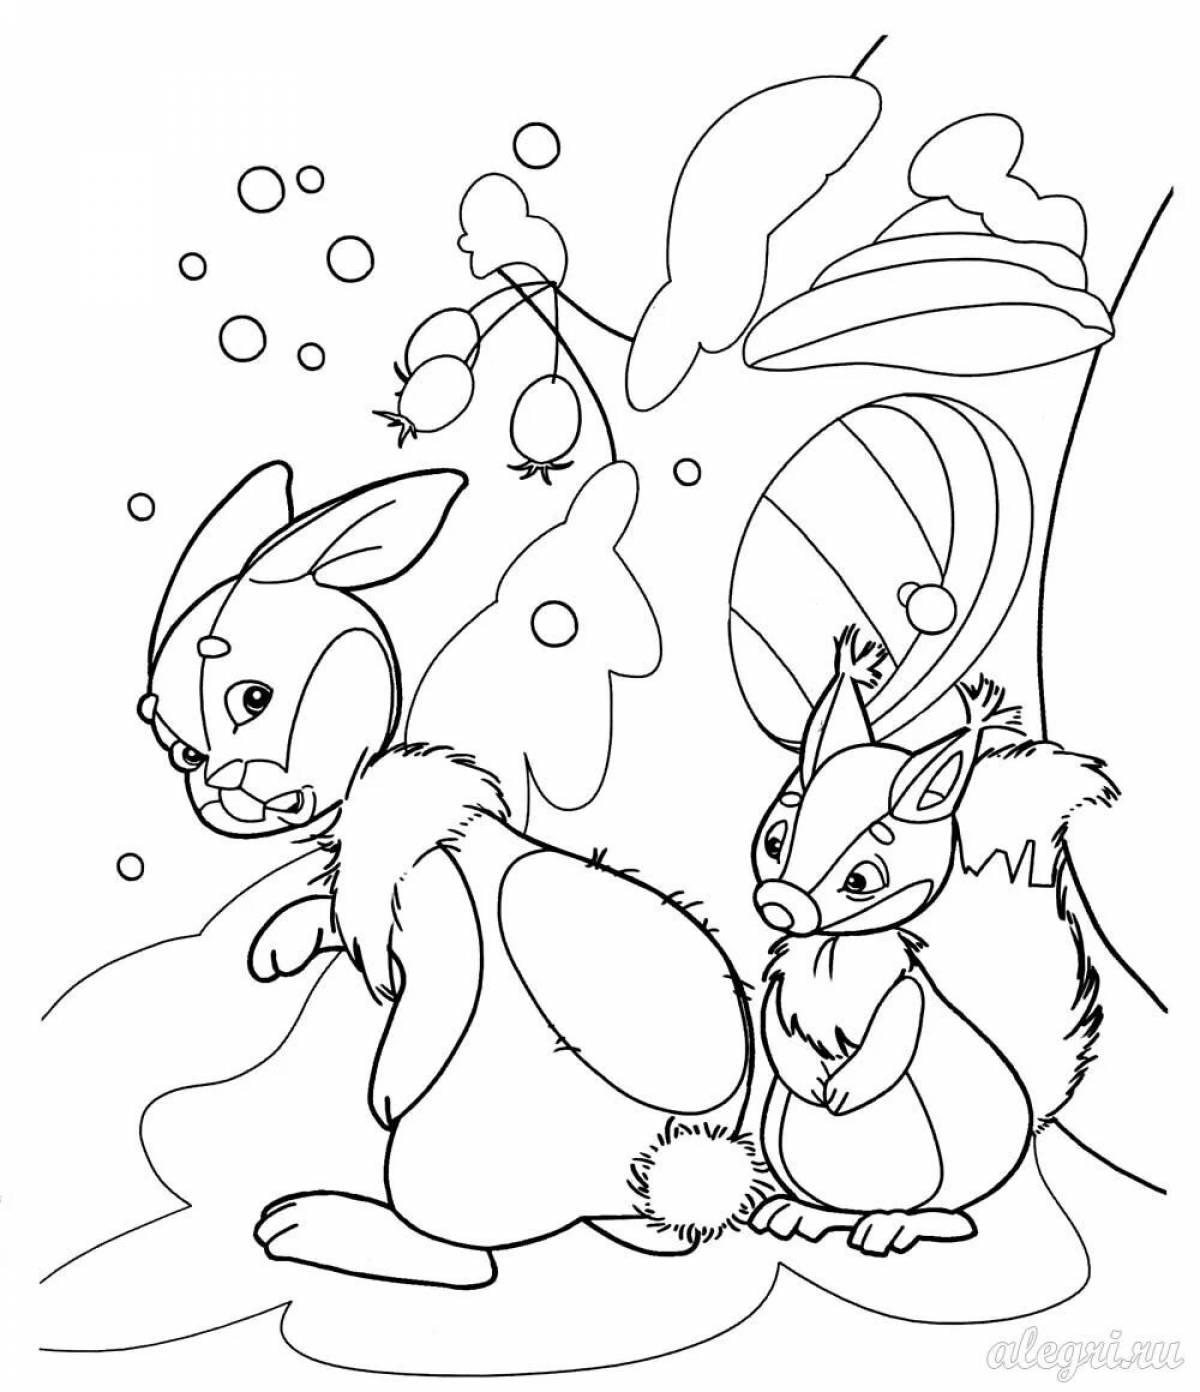 Outstanding hare and squirrel coloring page